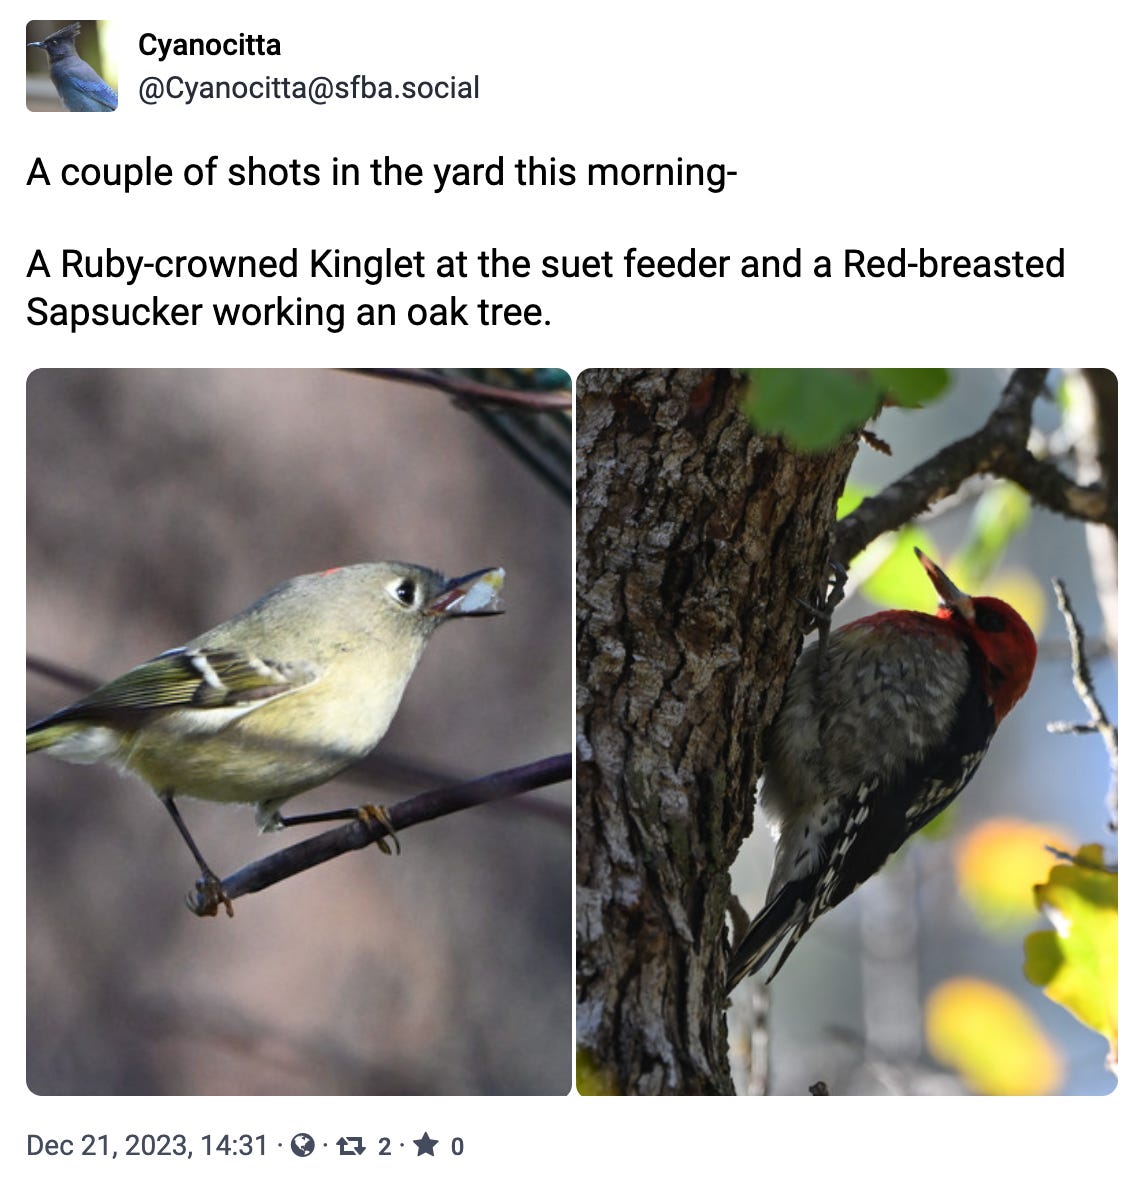 A couple of shots in the yard this morning-  A Ruby-crowned Kinglet at the suet feeder and a Red-breasted Sapsucker working an oak tree.